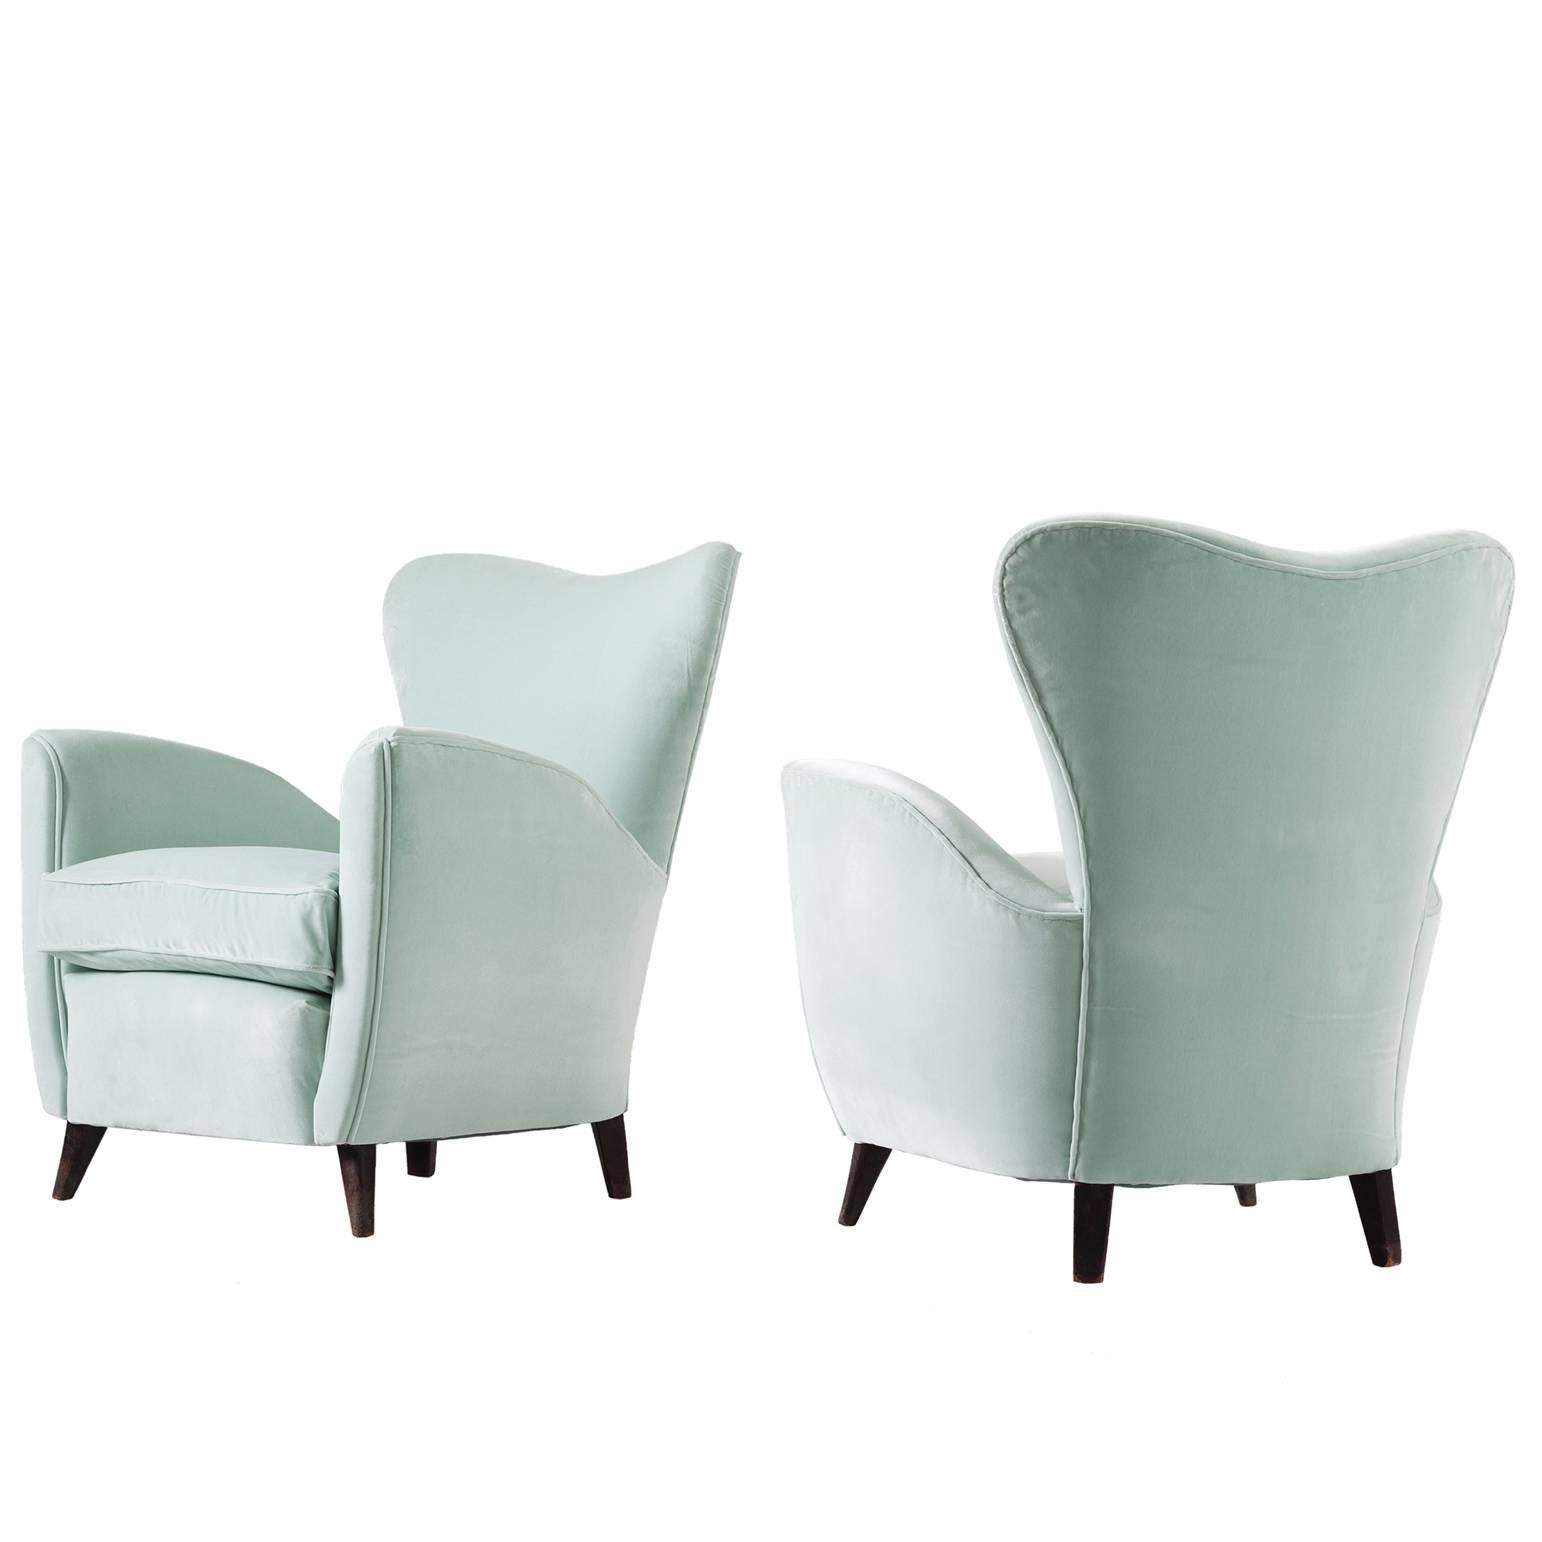 Set of Two Italian Easy Chairs in Mint Green Upholstery